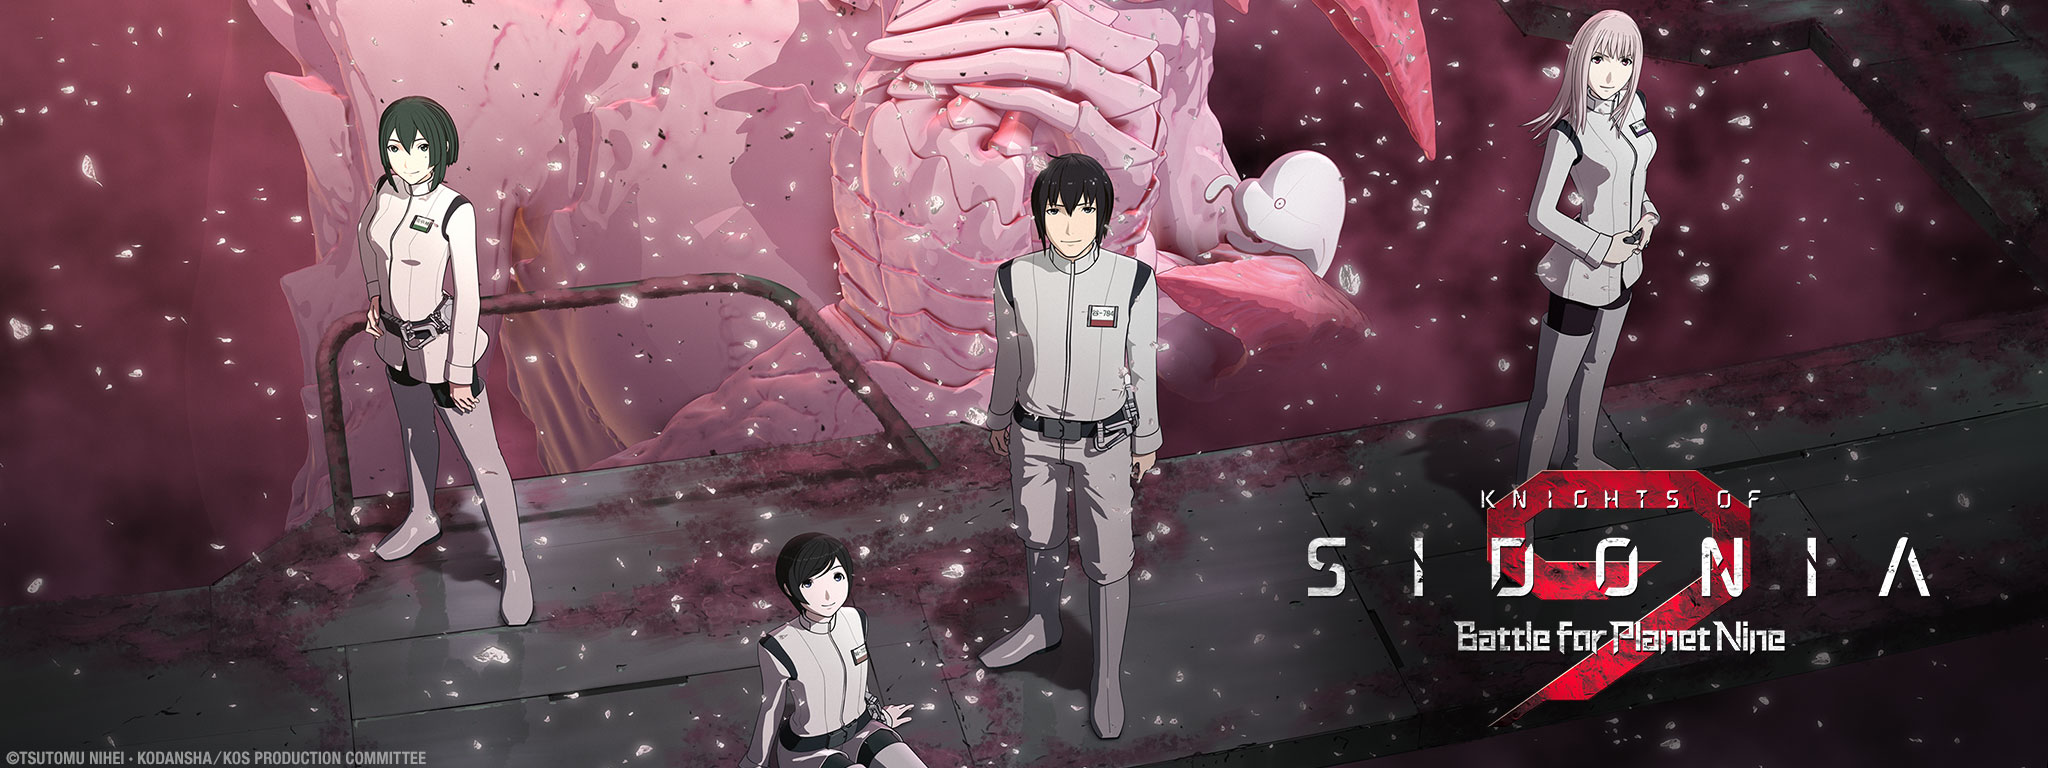 Title Art for Knights of Sidonia Season 2: Battle for Planet Nine